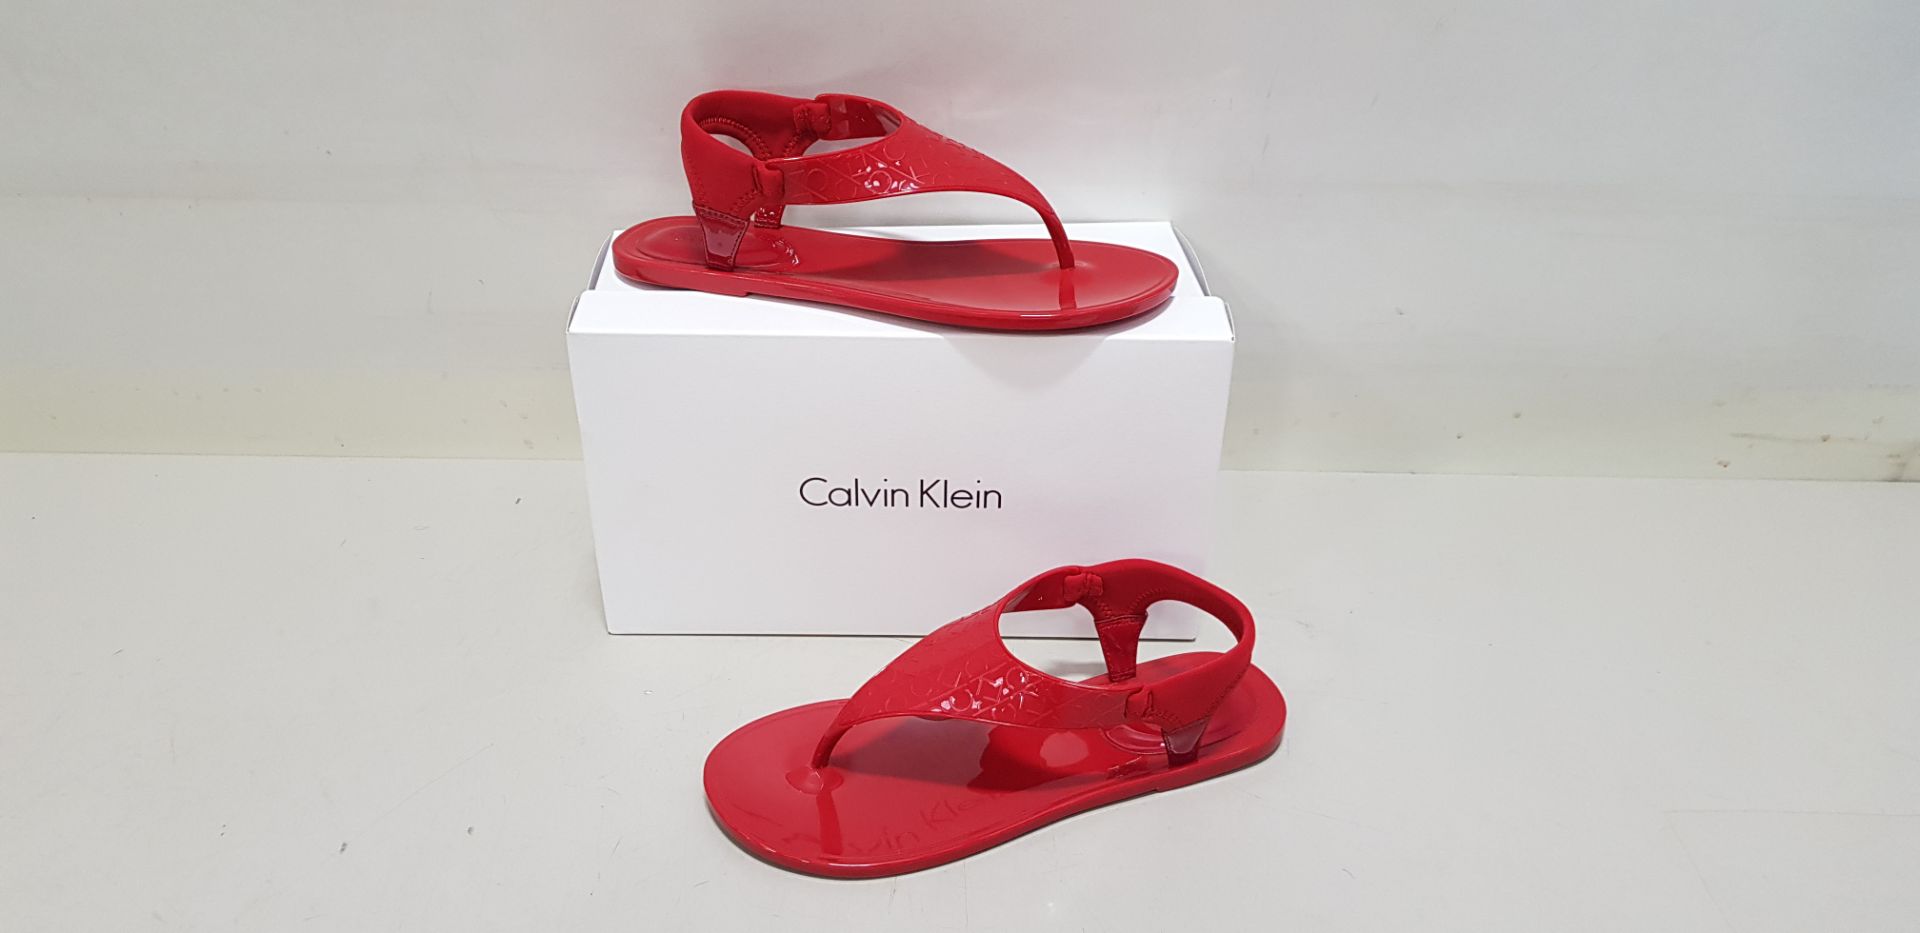 10 X BRAND NEW CALVIN KLEIN JANNY MOULDED SANDALS IN CRIMSON RED SIZE UK 6